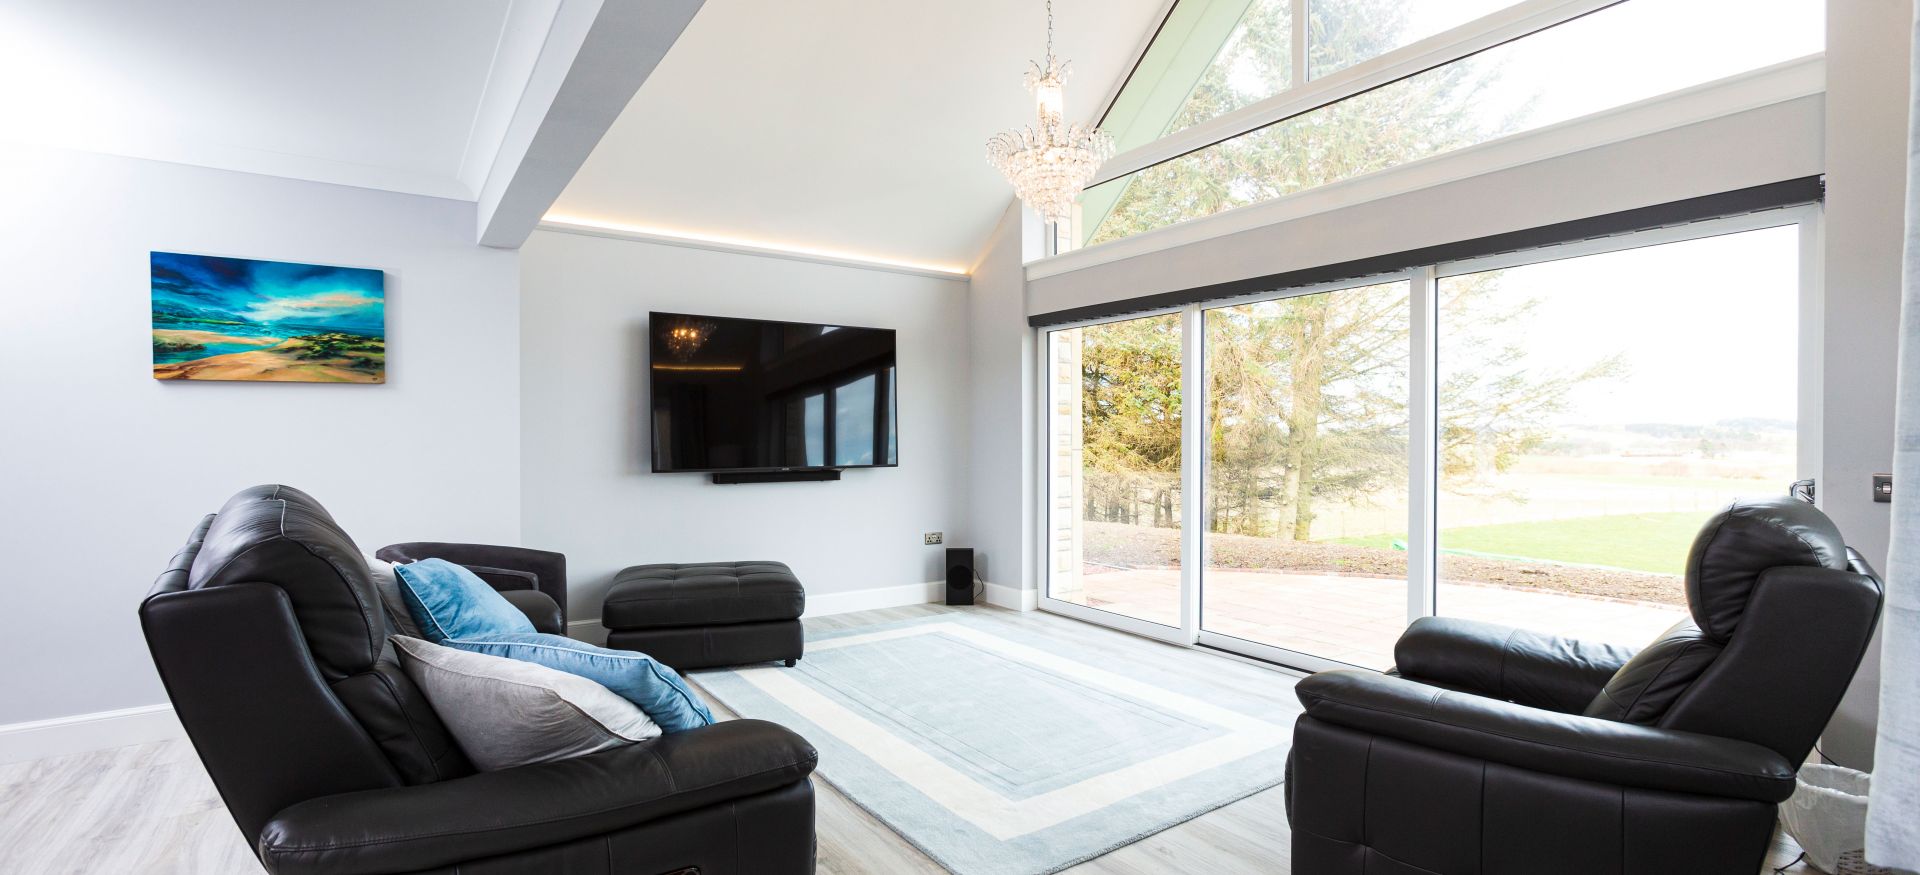 Maximising the light in this living space.